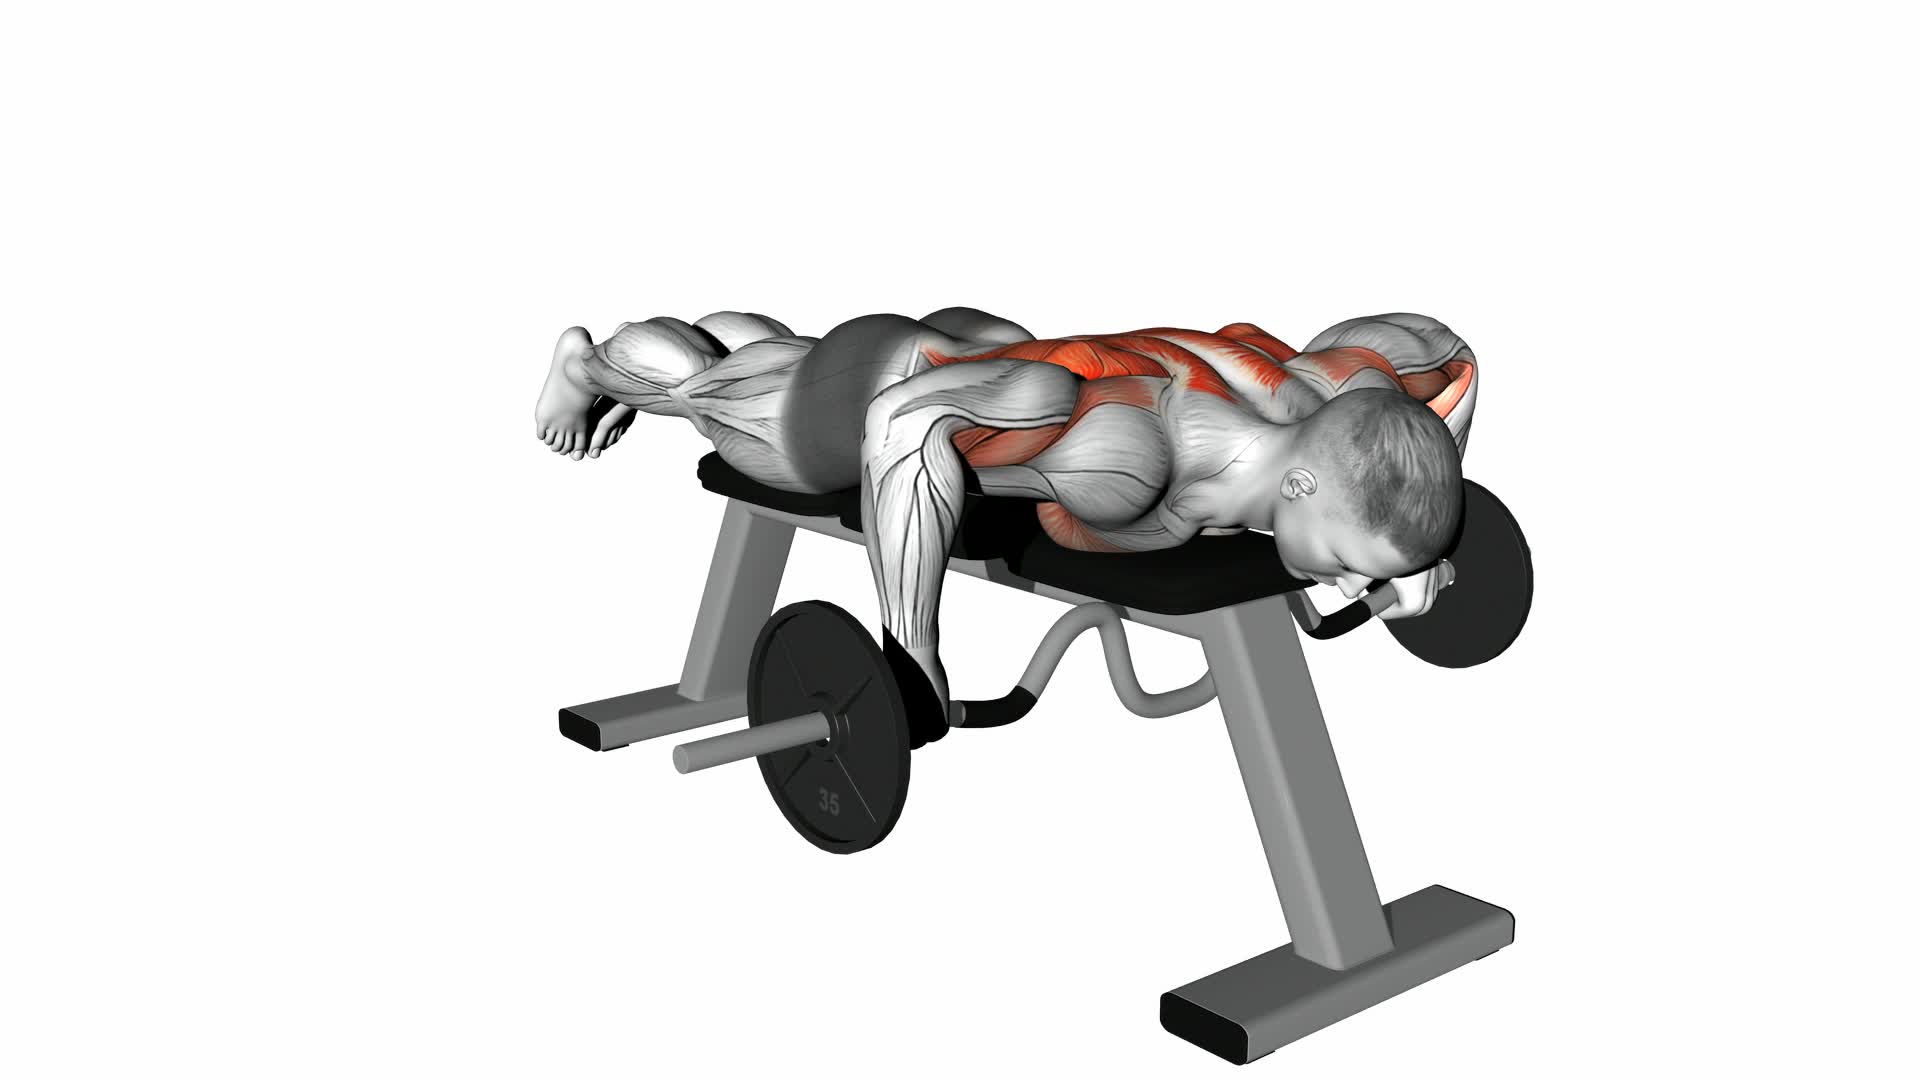 Cambered-Bar Lying Row - Video Exercise Guide & Tips